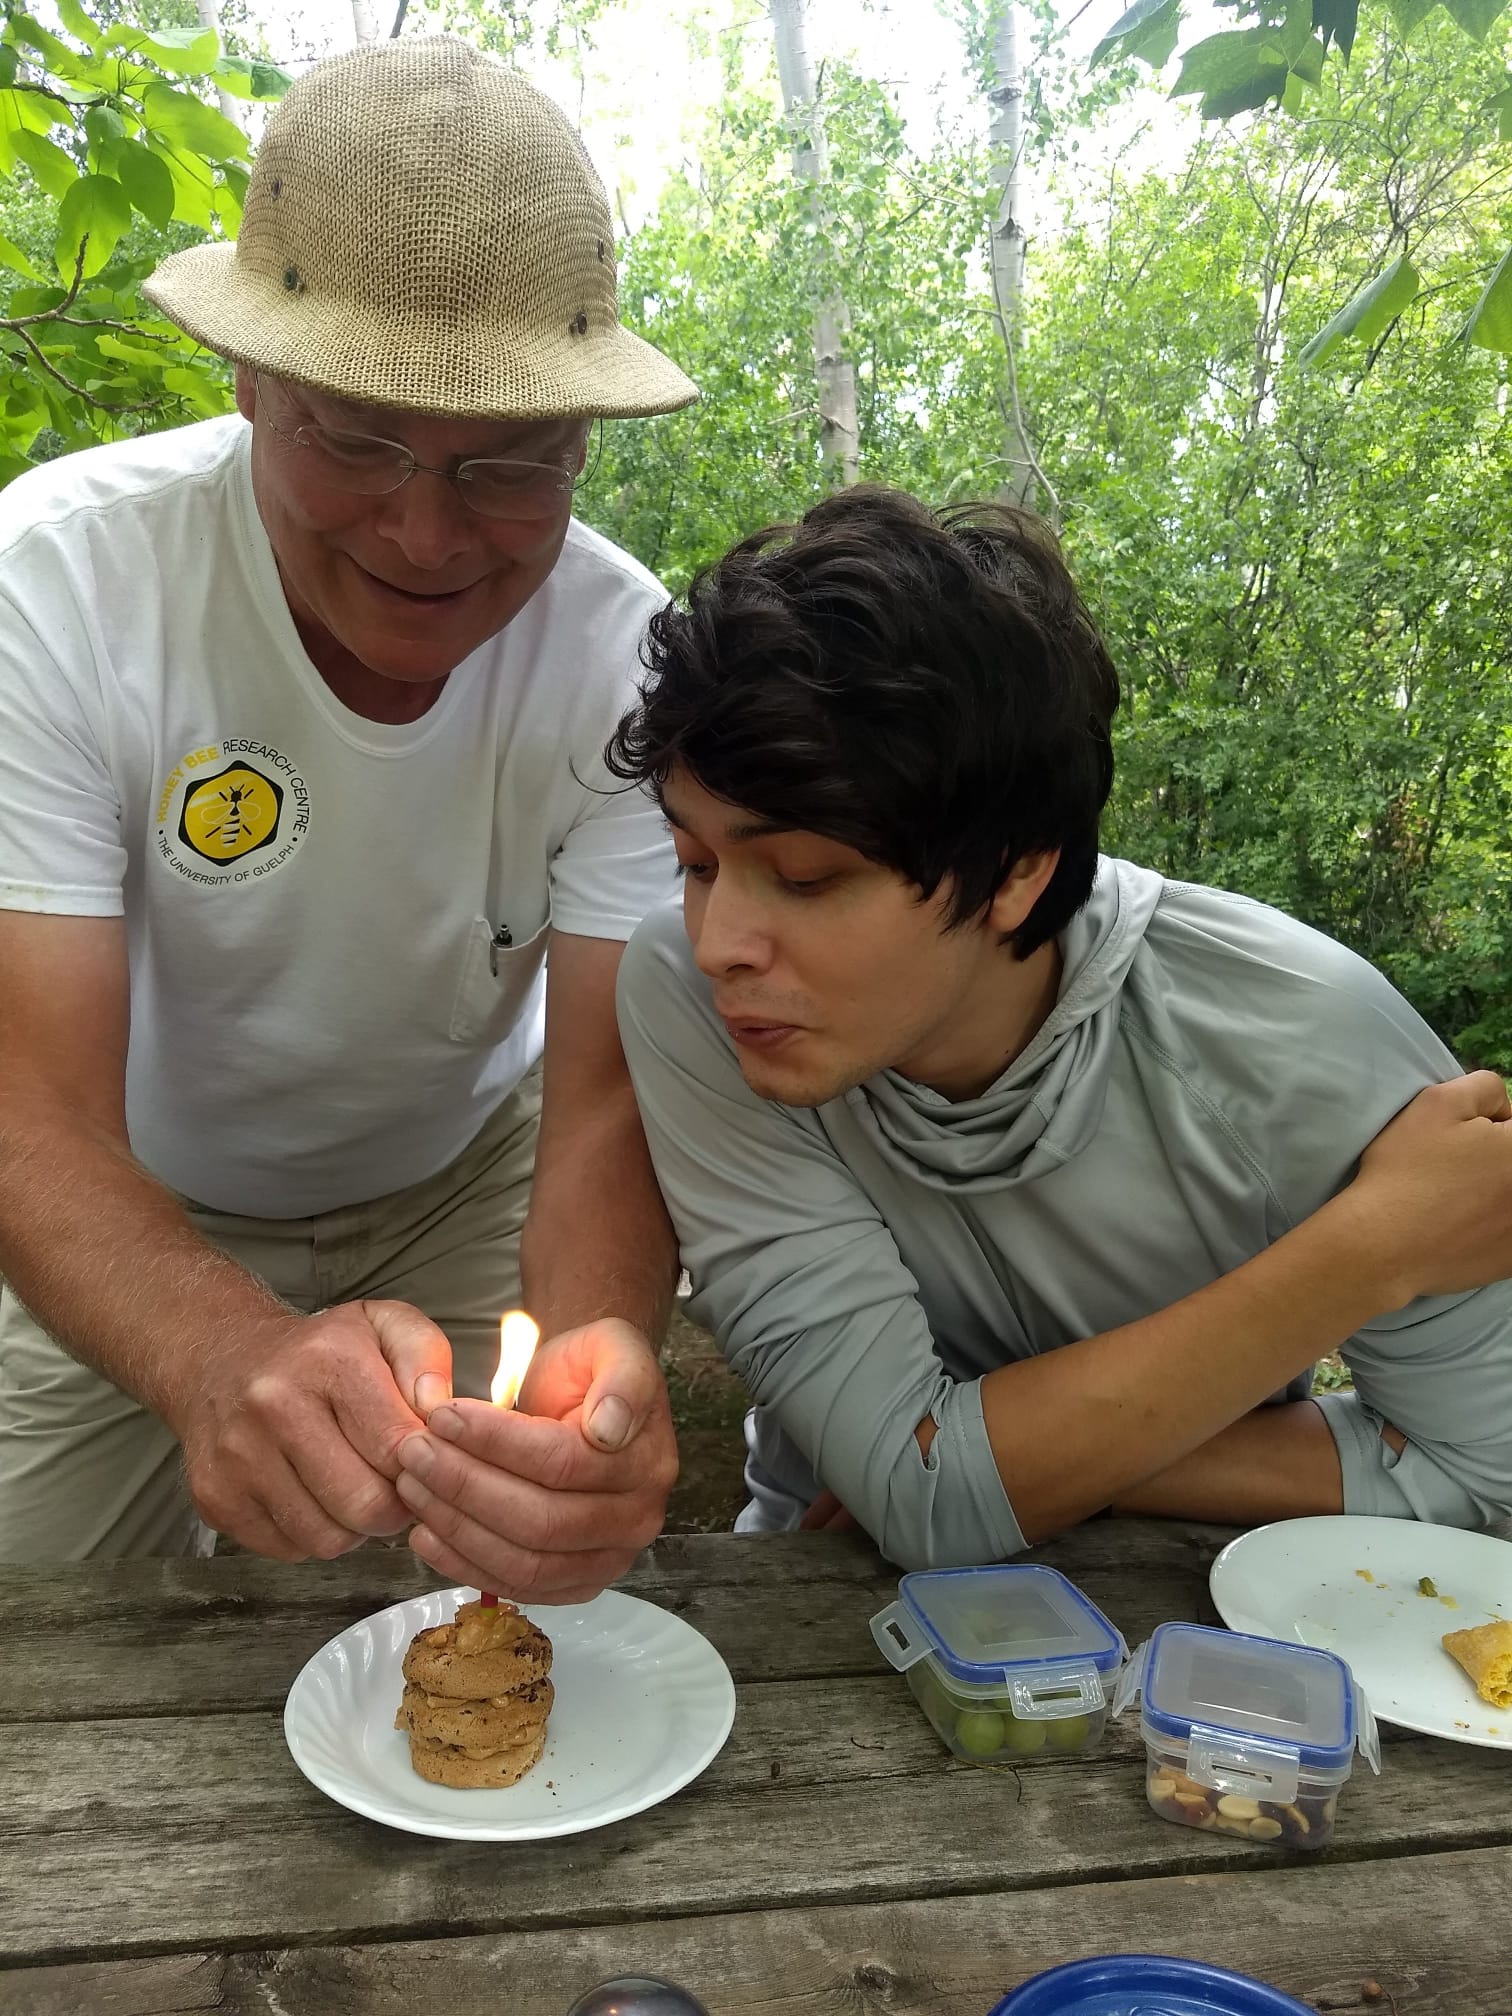 Two people who work with the Honey Bee Research Station lighting a candle